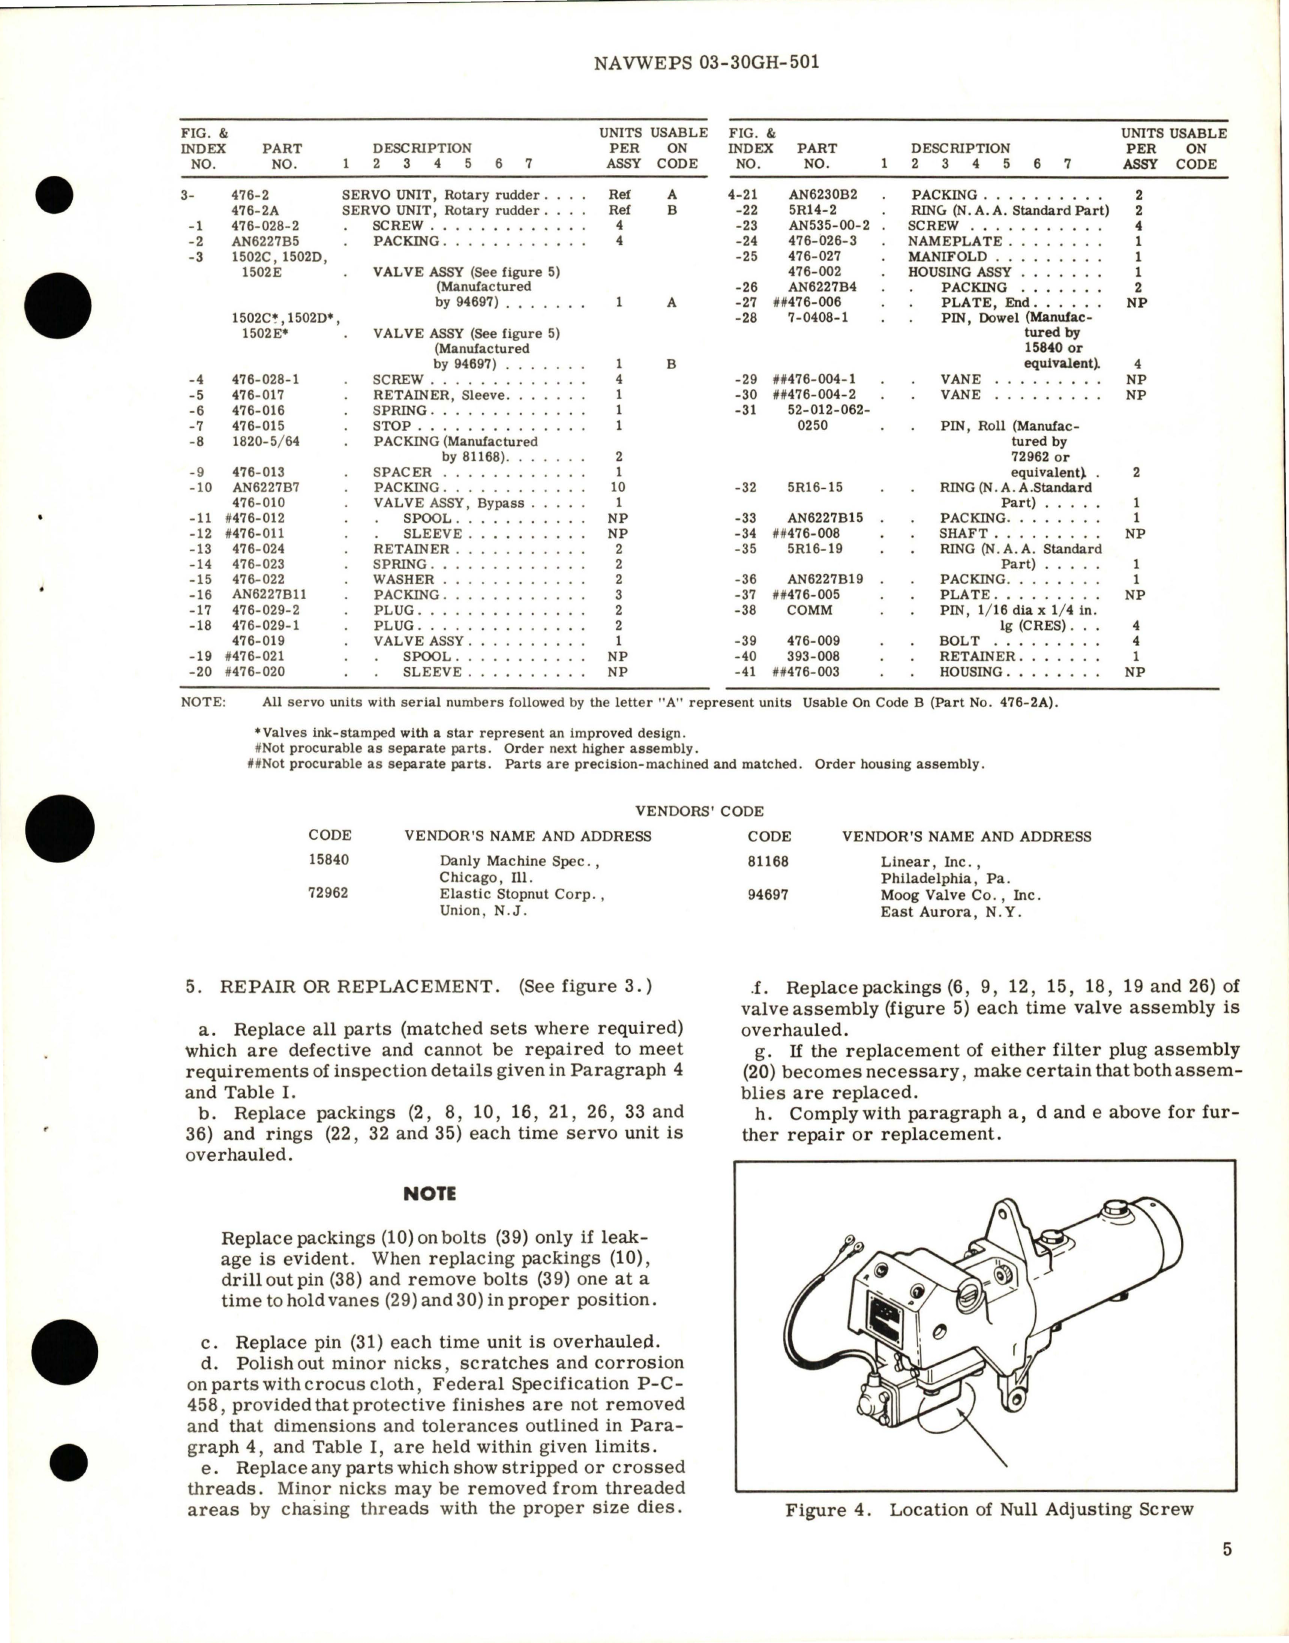 Sample page 5 from AirCorps Library document: Overhaul Instructions with Parts Breakdown for Rotary Rudder Servo Unit - Part 476-2 & 476-2A